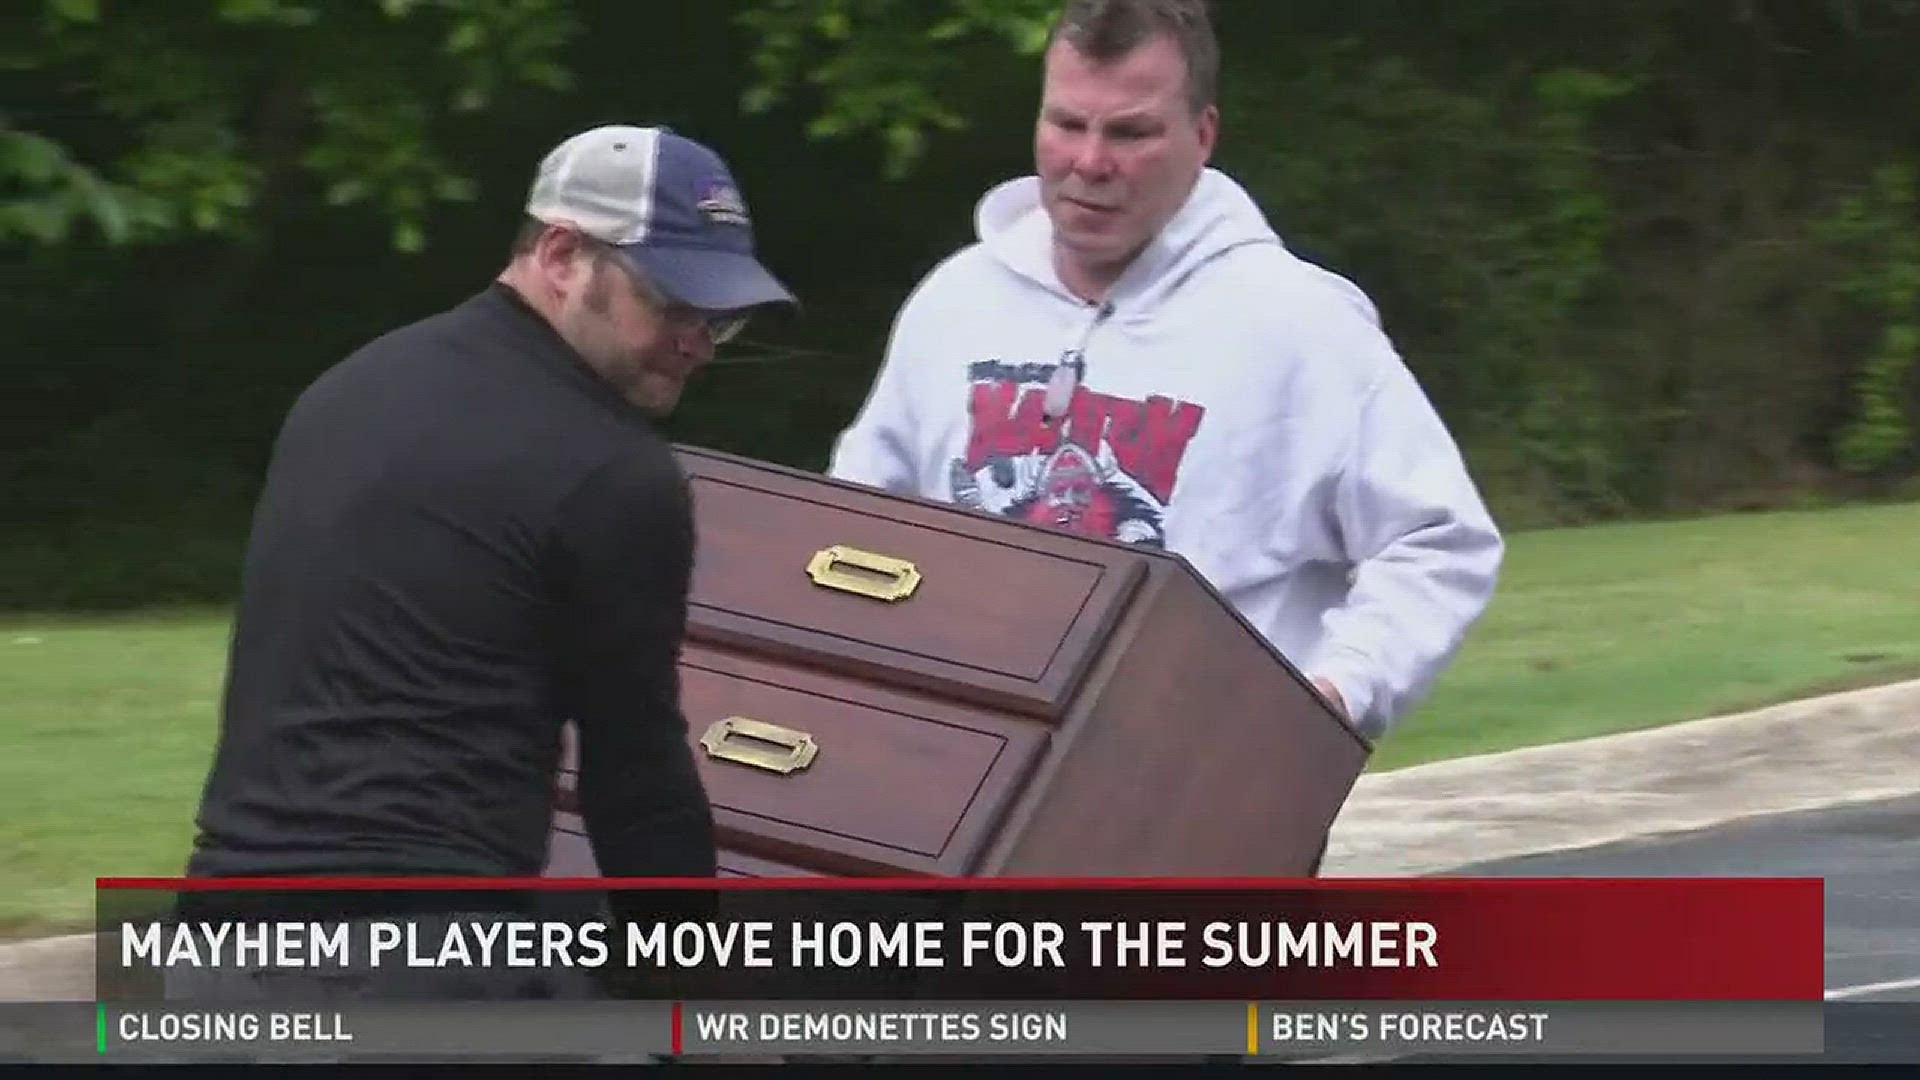 Mayhem players move home for the summer